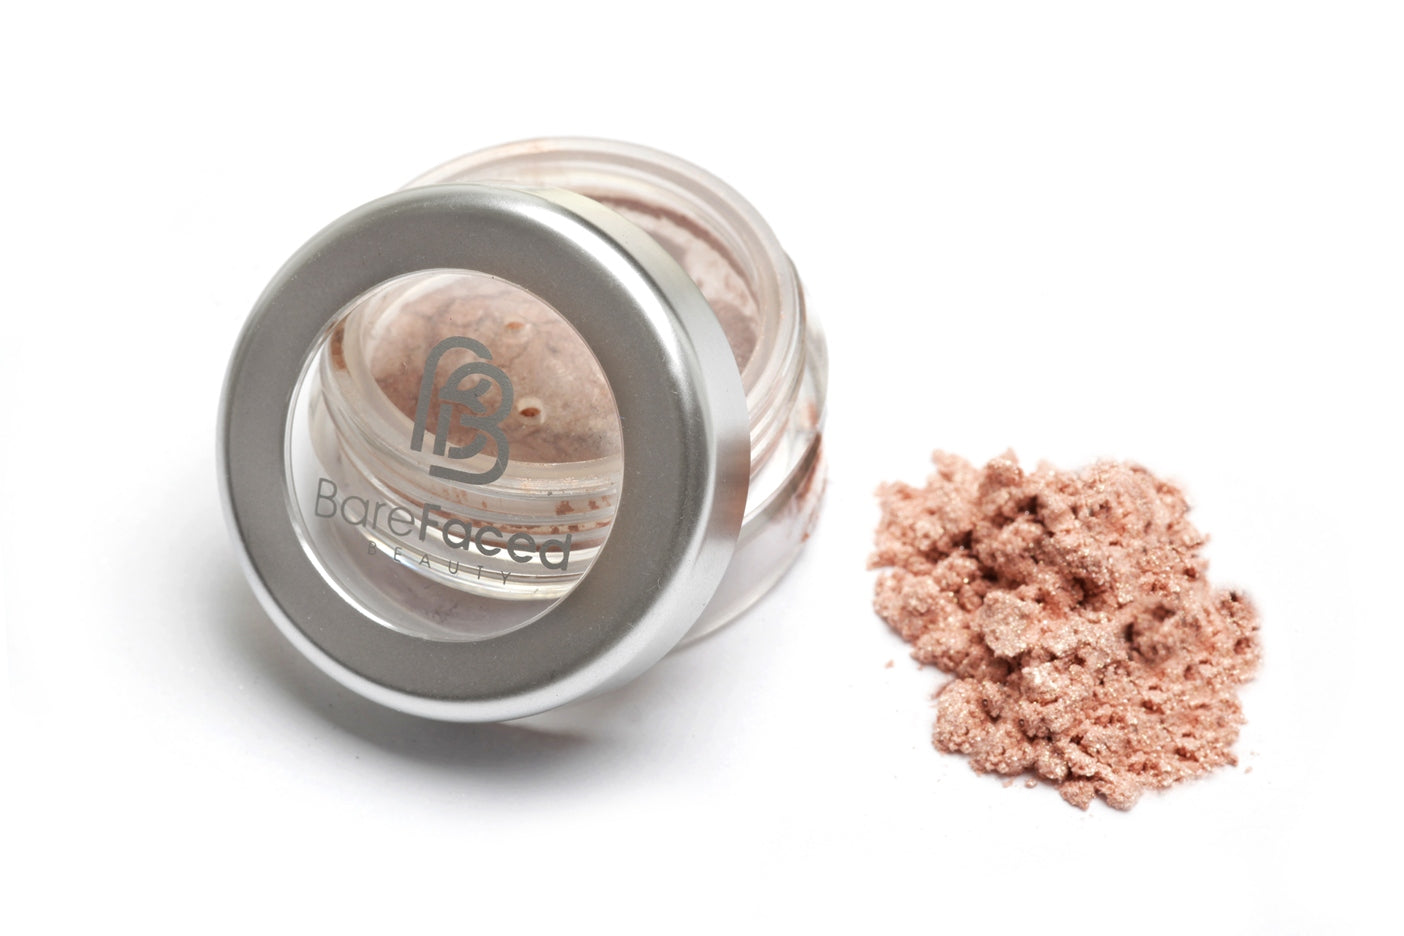 A small round pot of mineral eyeshadow, with a swatch of the powder next to it showing a shimmery pale pink shade